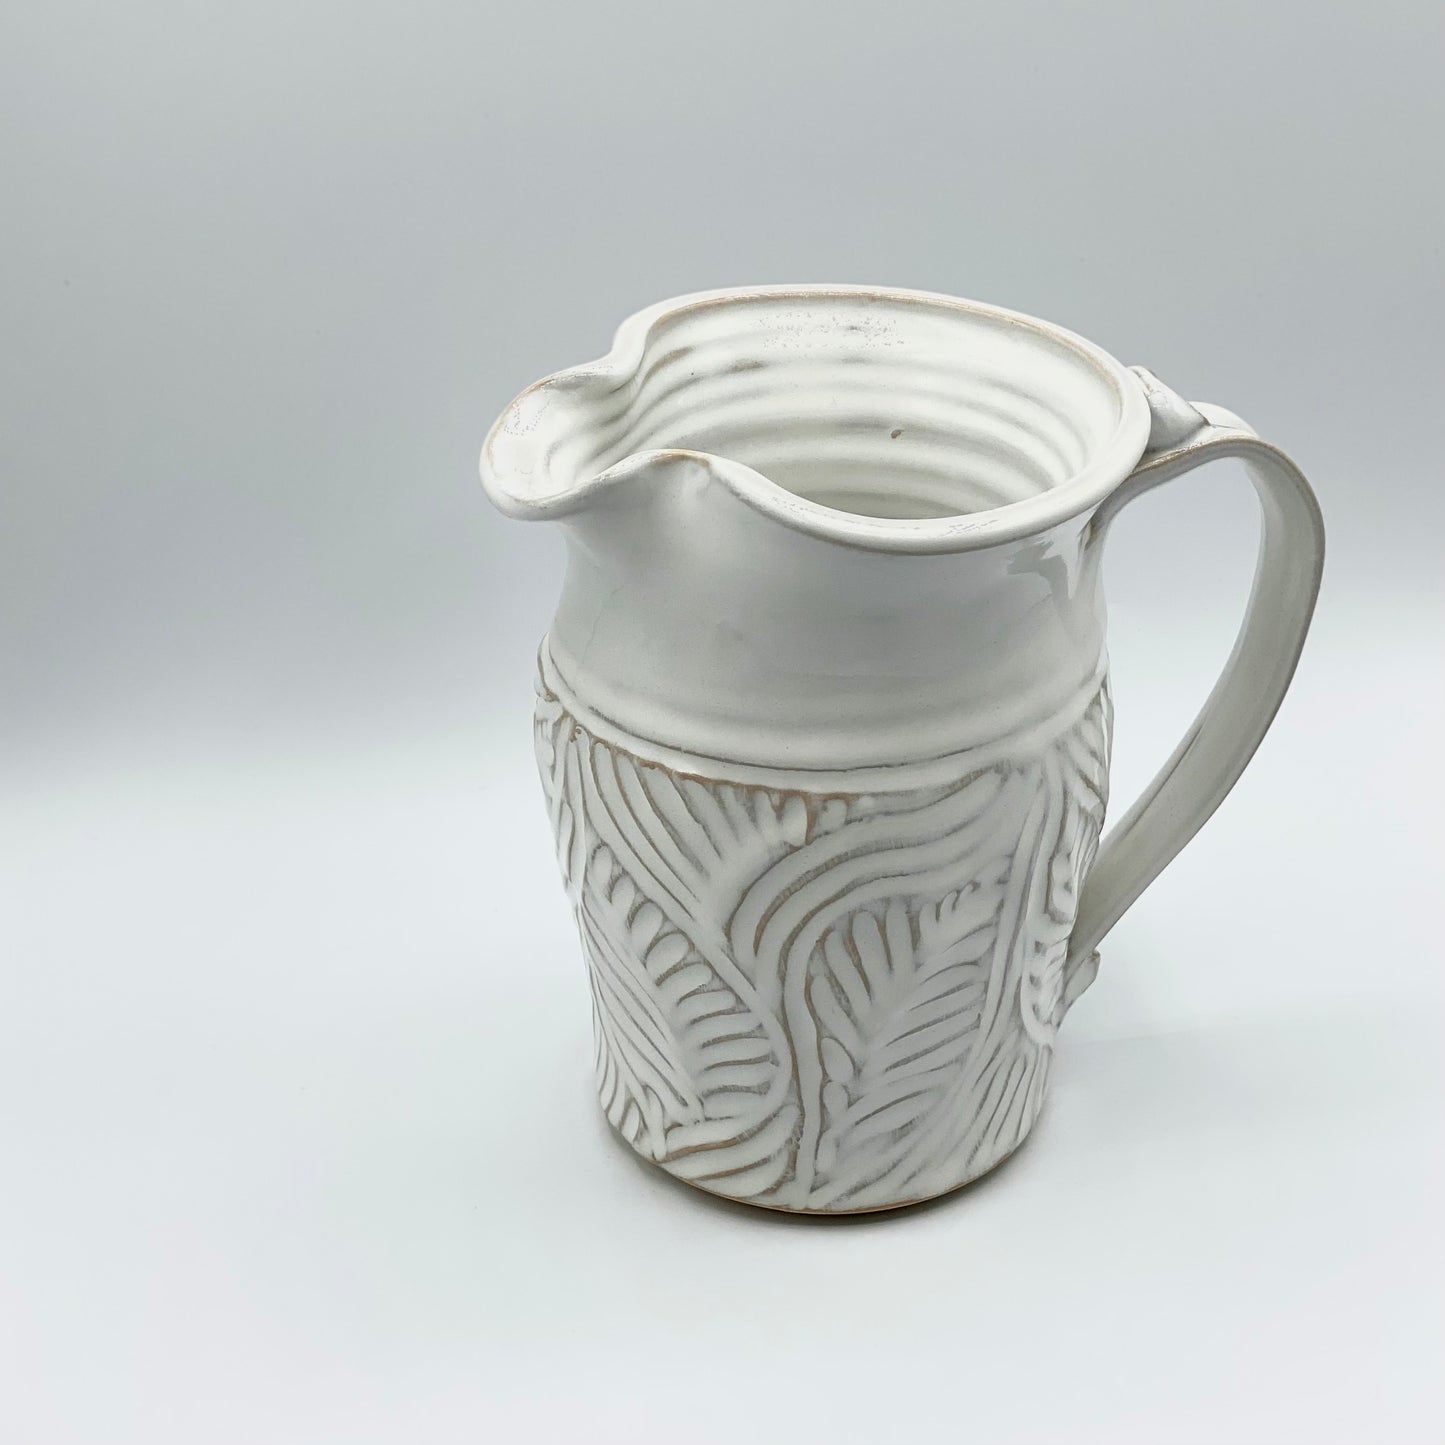 Pitcher by Greig Pottery